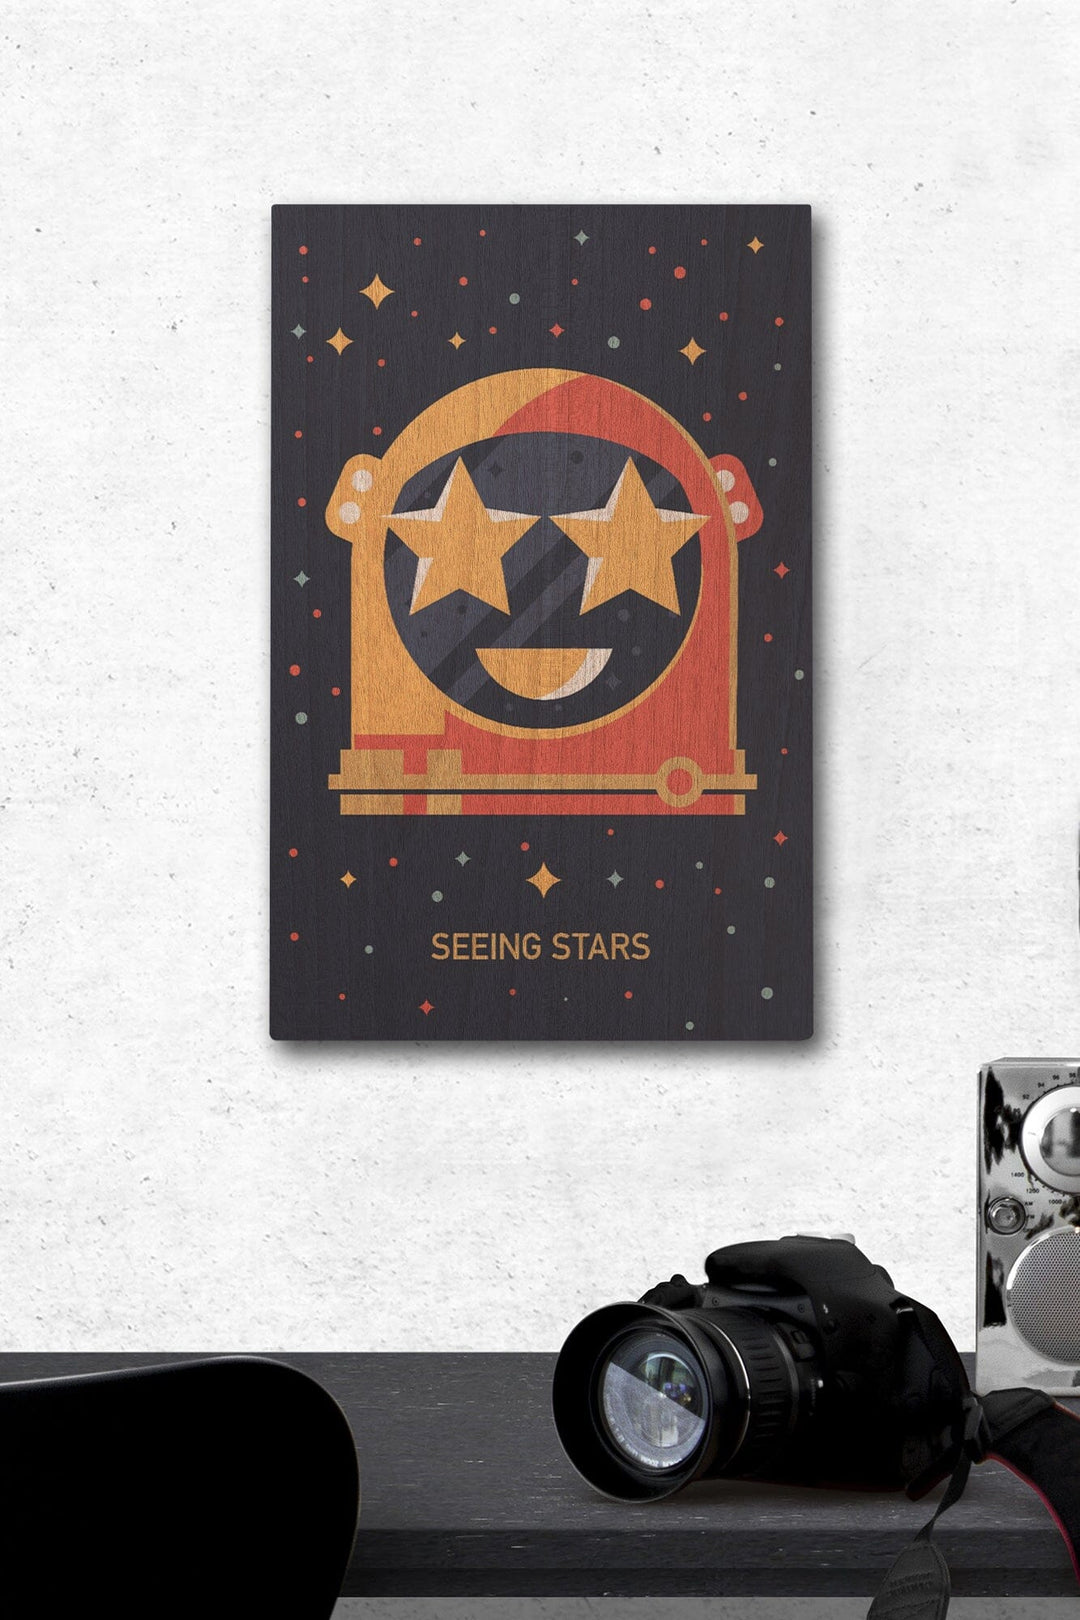 Equations and Emojis Collection, Astronaut Helmet, Seeing Stars, Wood Signs and Postcards Wood Lantern Press 12 x 18 Wood Gallery Print 